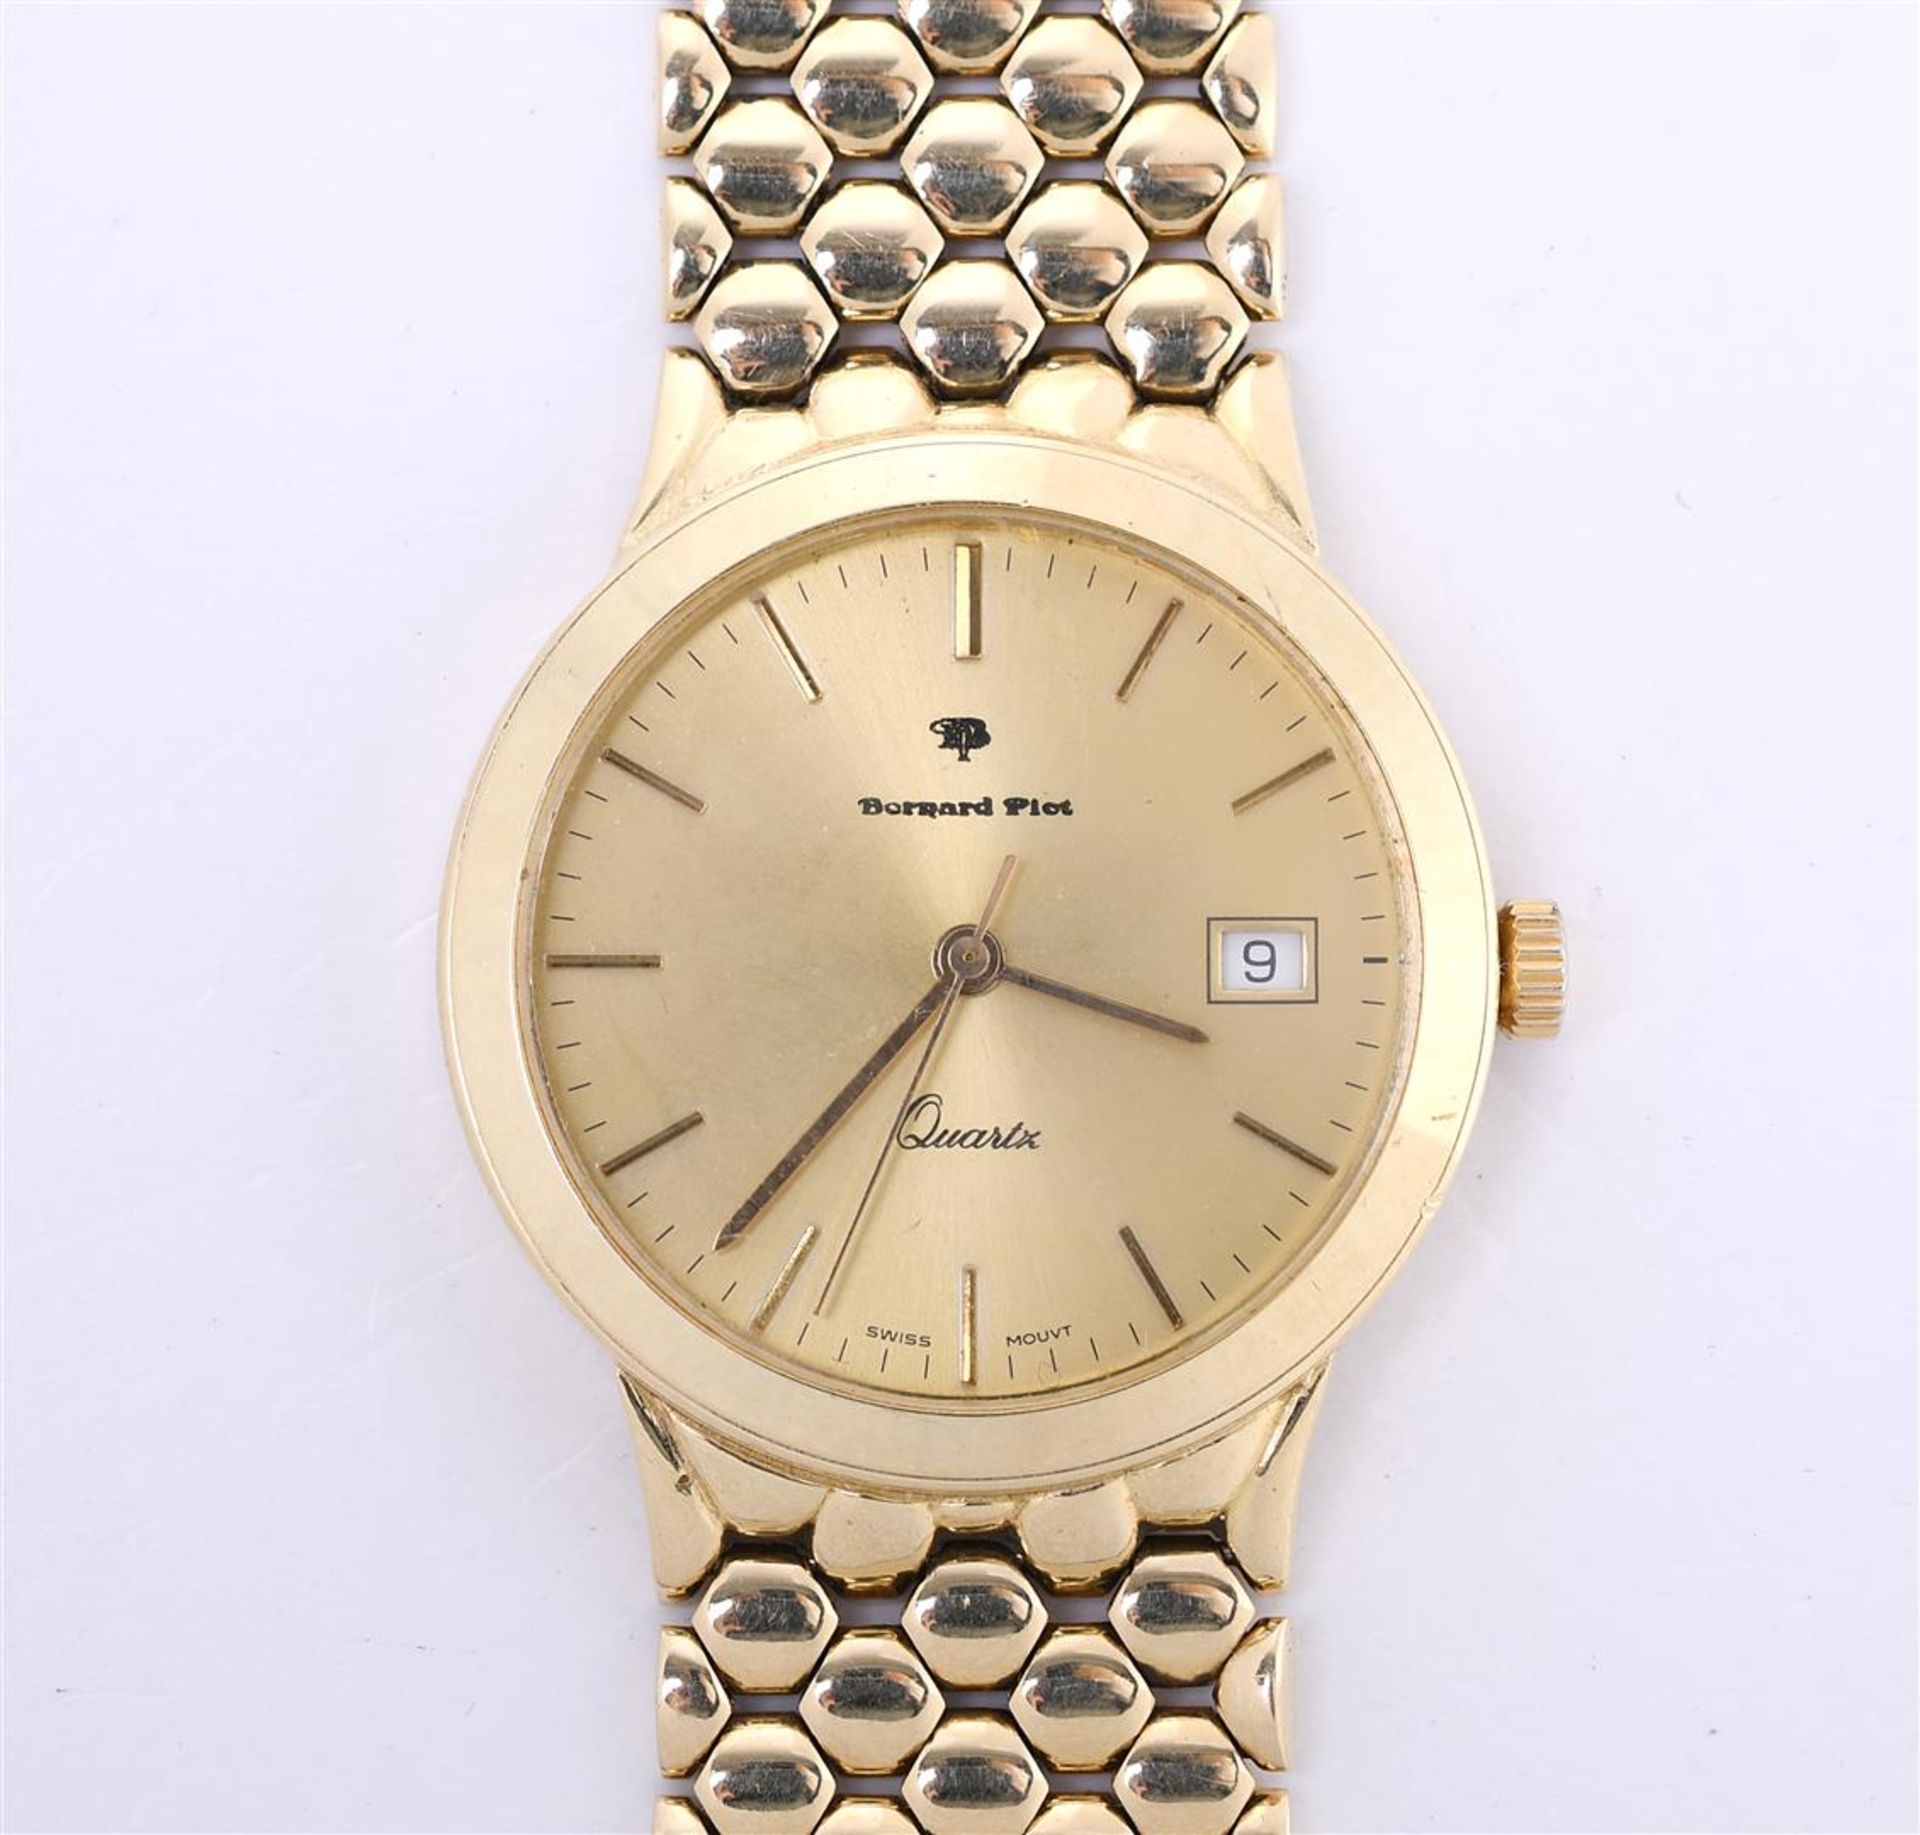 14 kt yellow gold Bernard Piot men's wristwatch with a round case and a gold-colored dial 